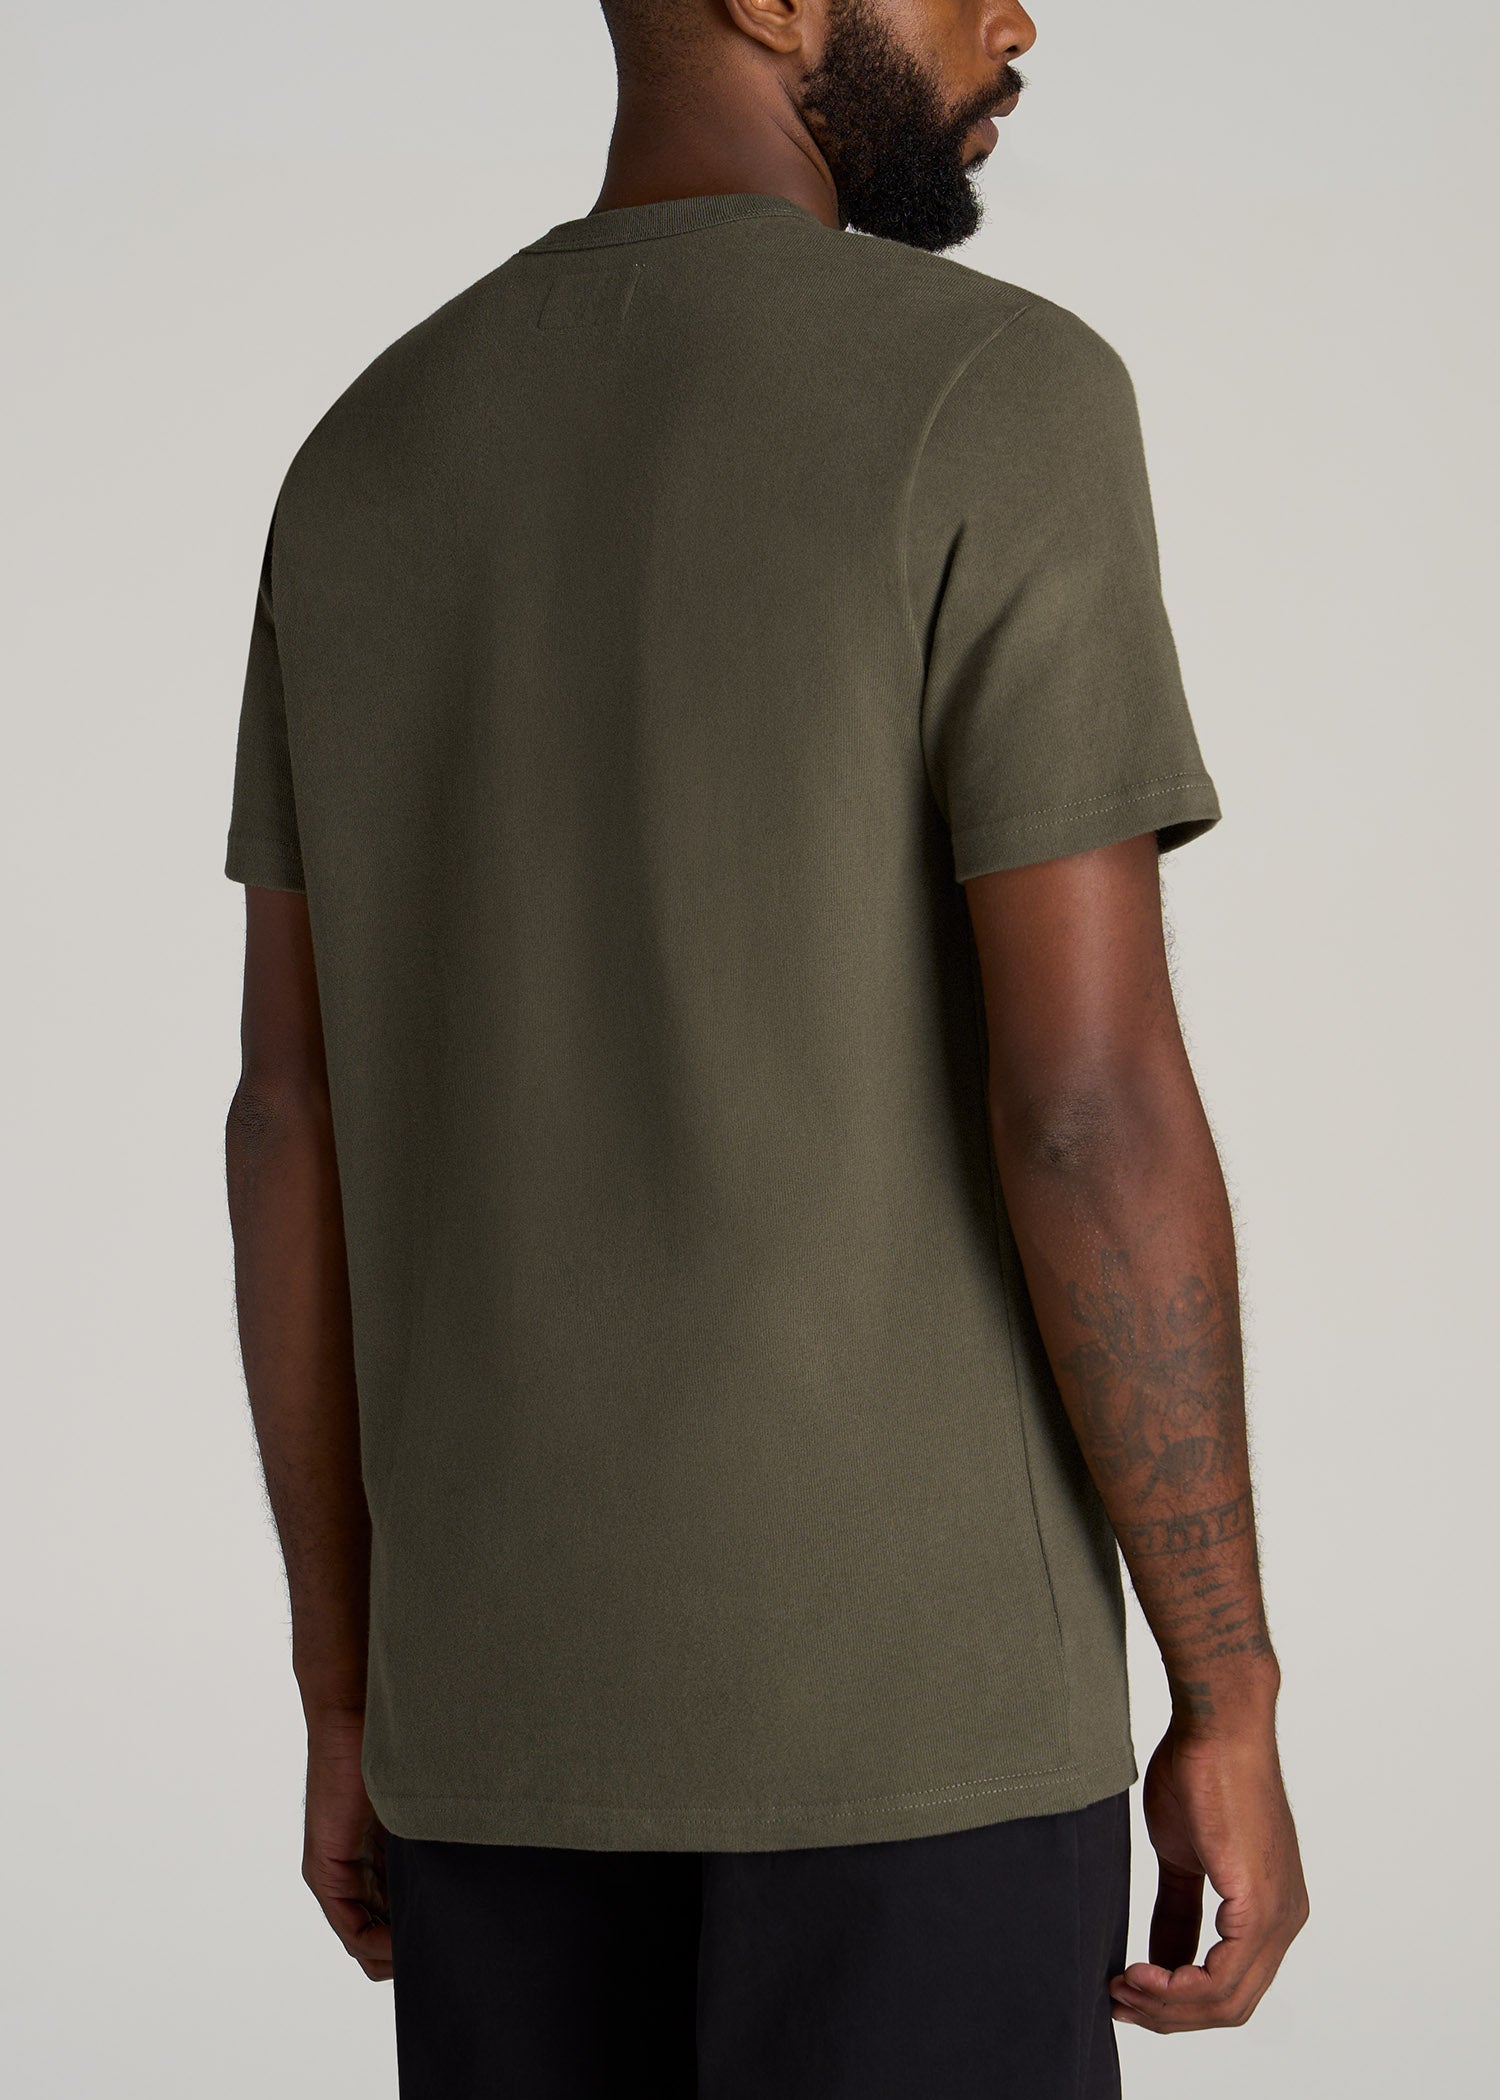       American-Tall-Men-Pigment-Dyed-Heavyweight-Tee-Vintage-Surplus-Green-back